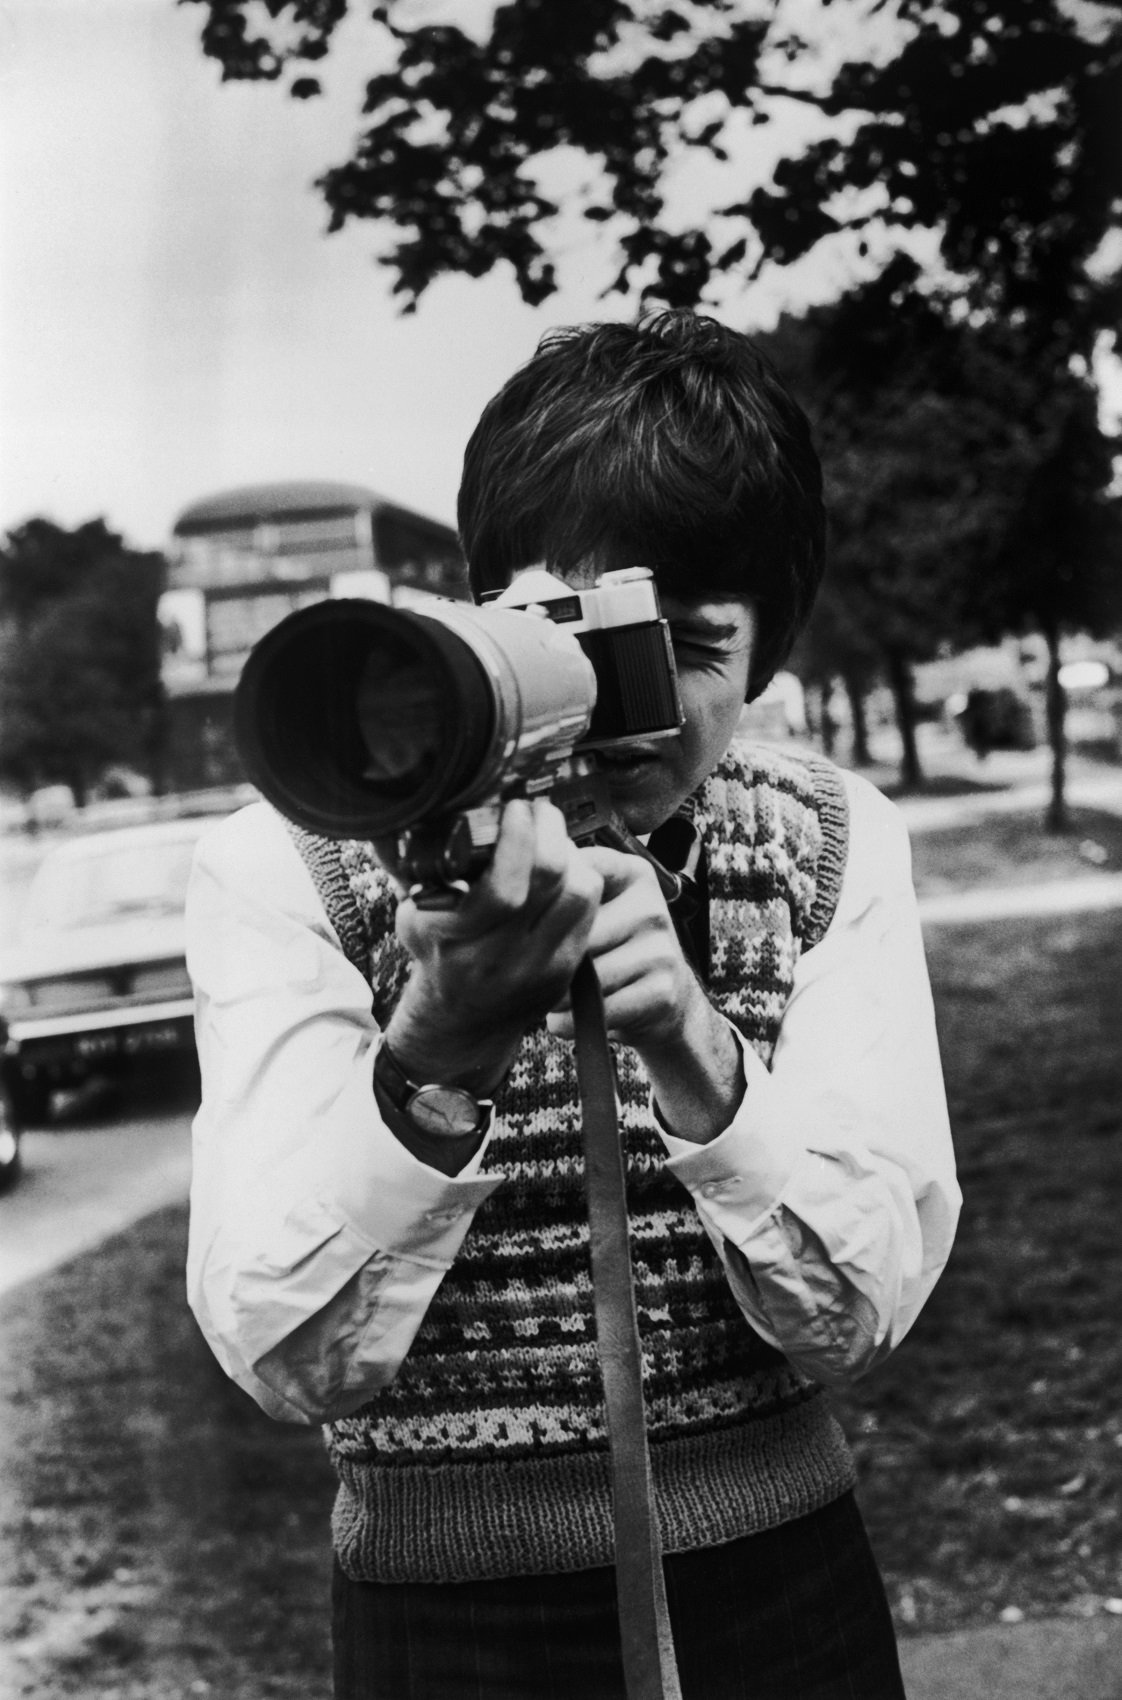 Paul McCartney takes some shots with a Russian Zenit Photo-Sniper camera outfit while waiting for the Magical Mystery Tour bus.